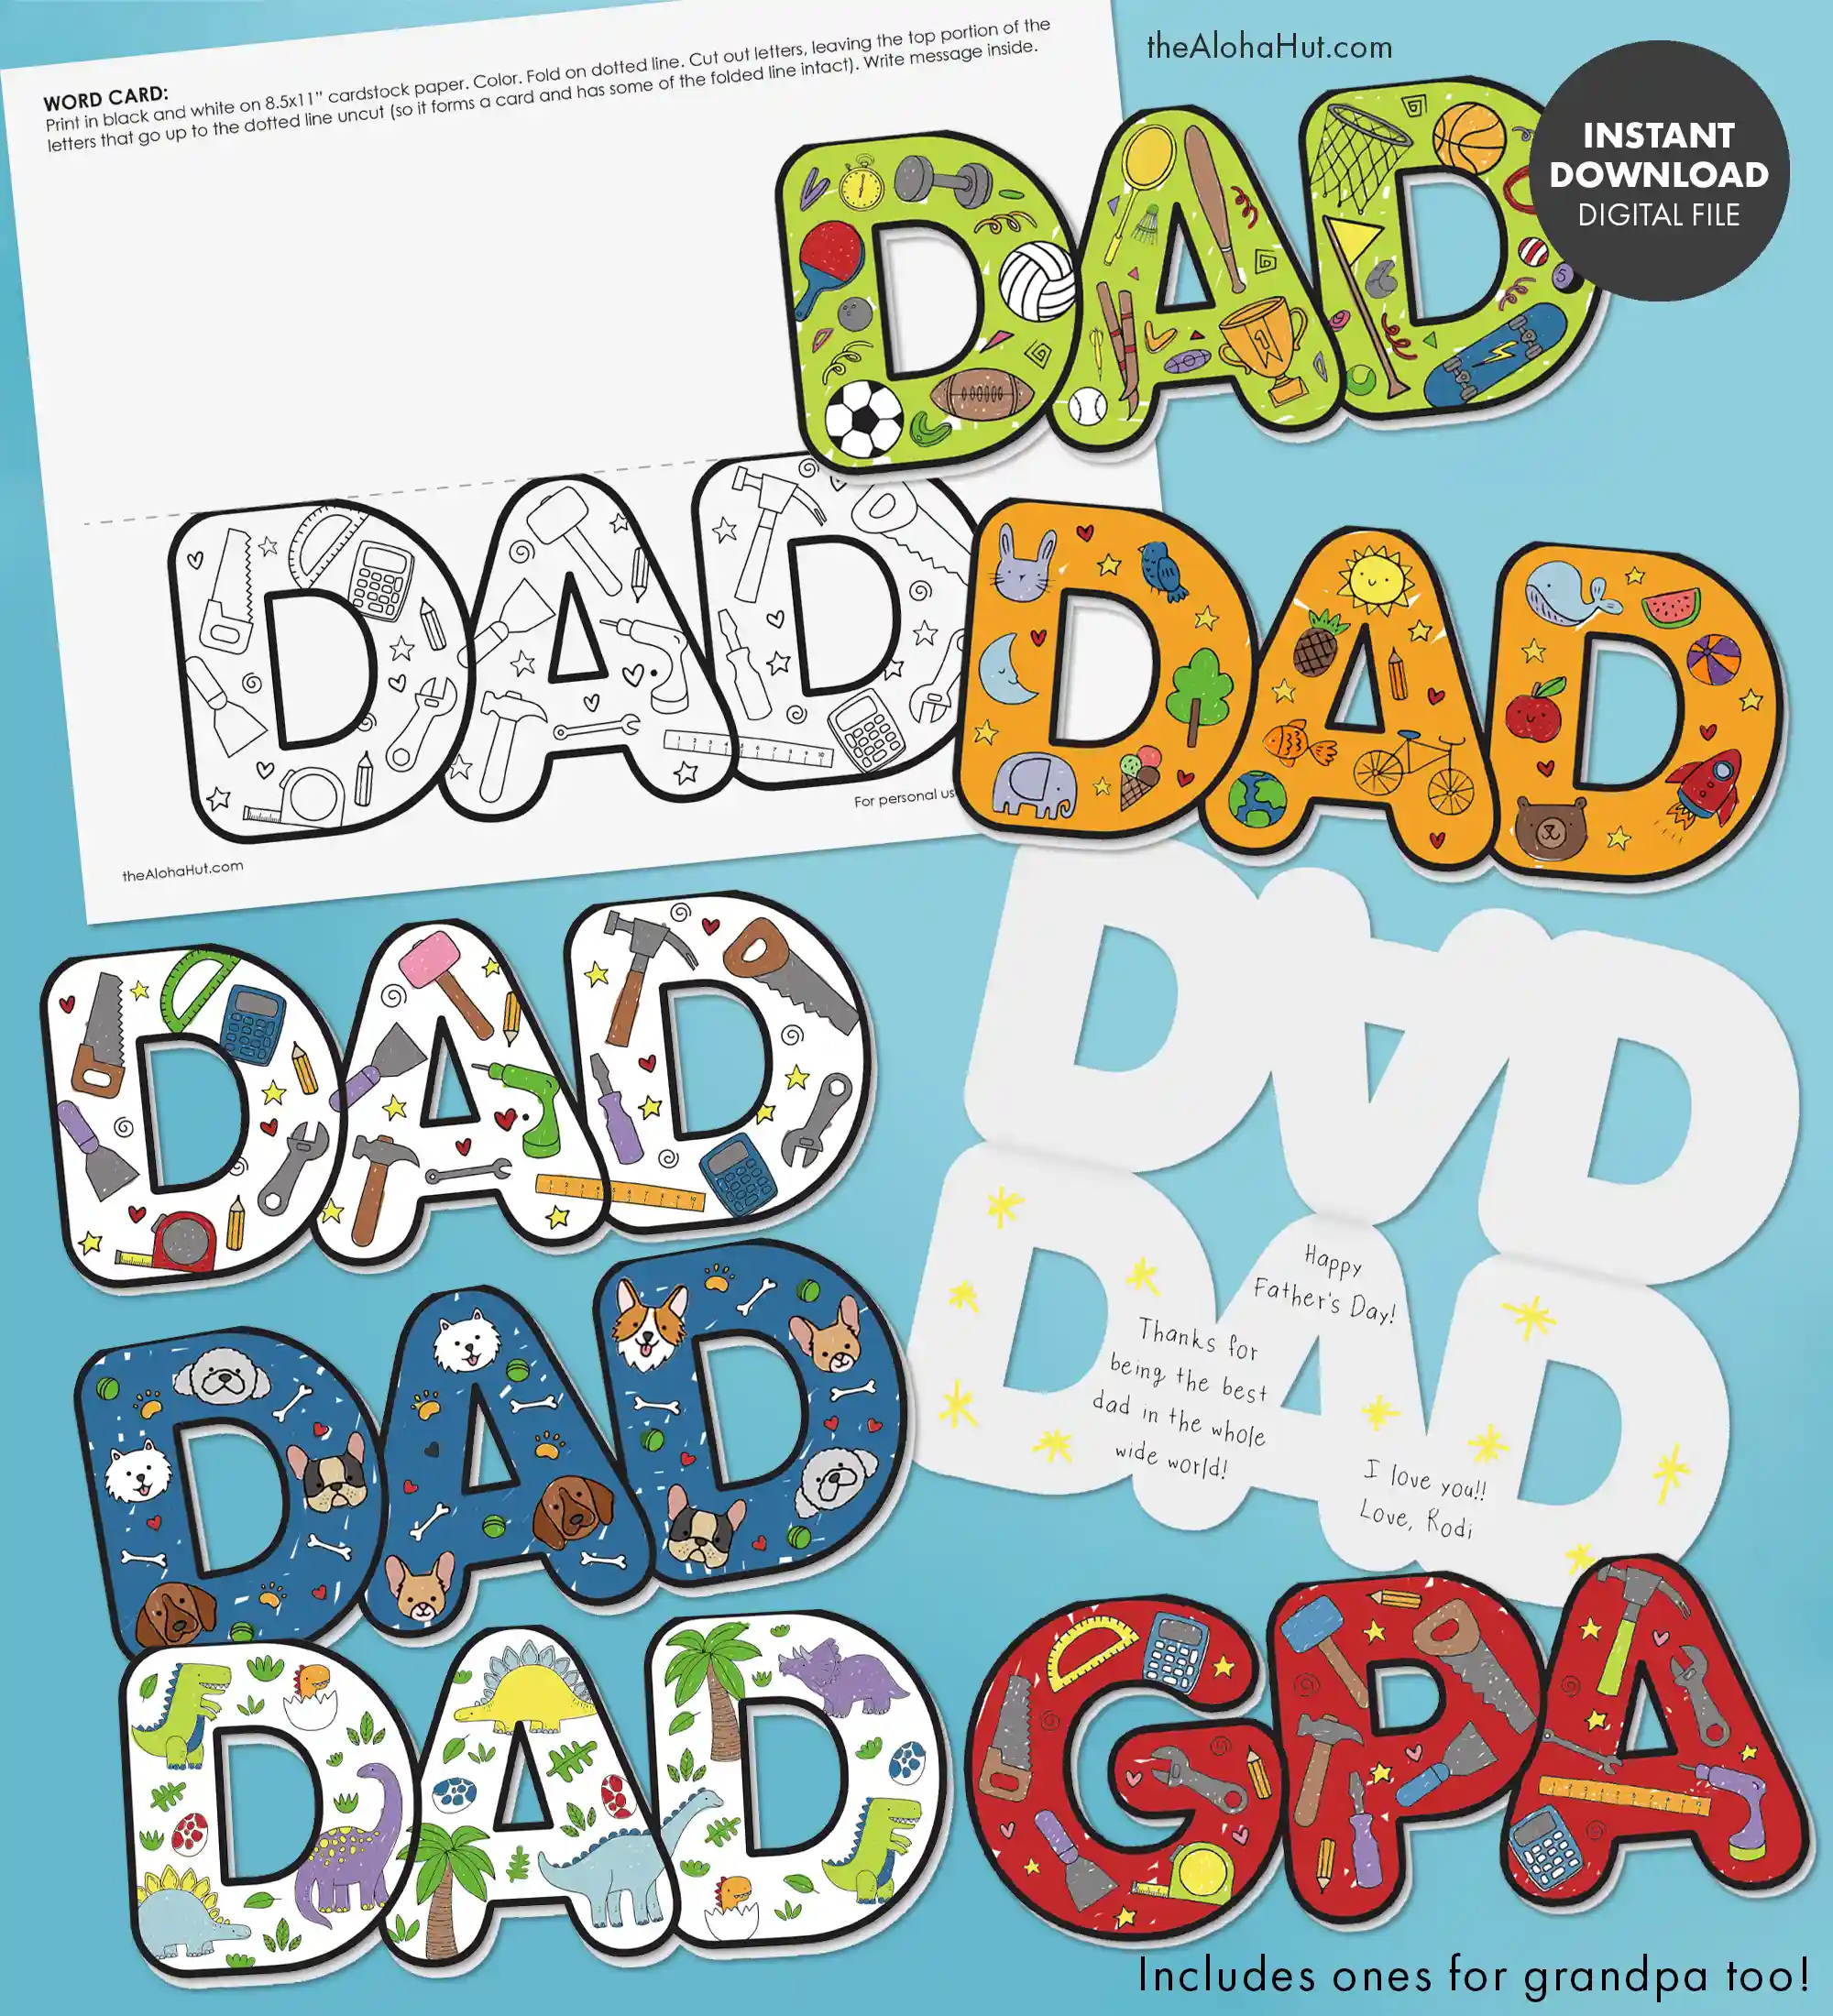 Father's Day word cards for dad and grandpa. This is a great craft and DIY card for dad for school kids, preschool kids, or if you want a homemade unique card for dad. Comes in five different themes (sports card, pets card, tools card, etc) so you can print dad's favorite and then color. Cut it out and write a personalized message to dad or grandpa. Easy Father's Day gift idea and the best card for dad and grandpa!